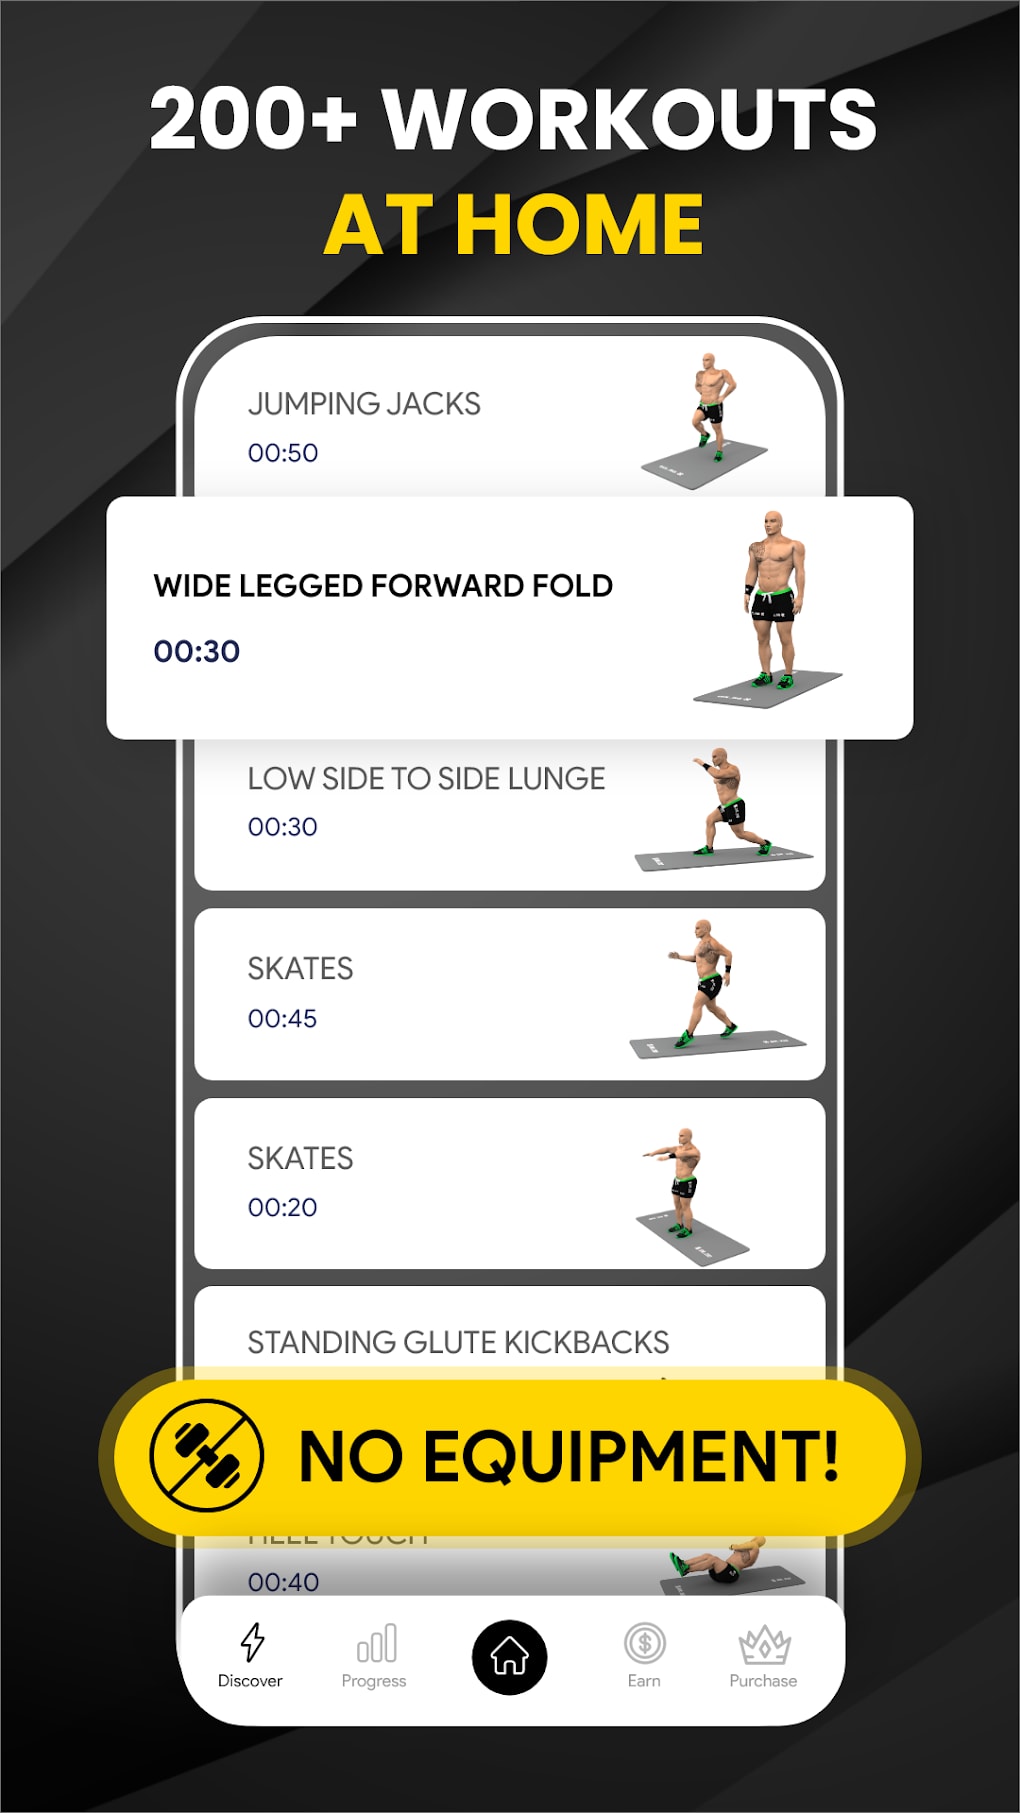 Chest Workout for Men at Home by ohealth apps studio